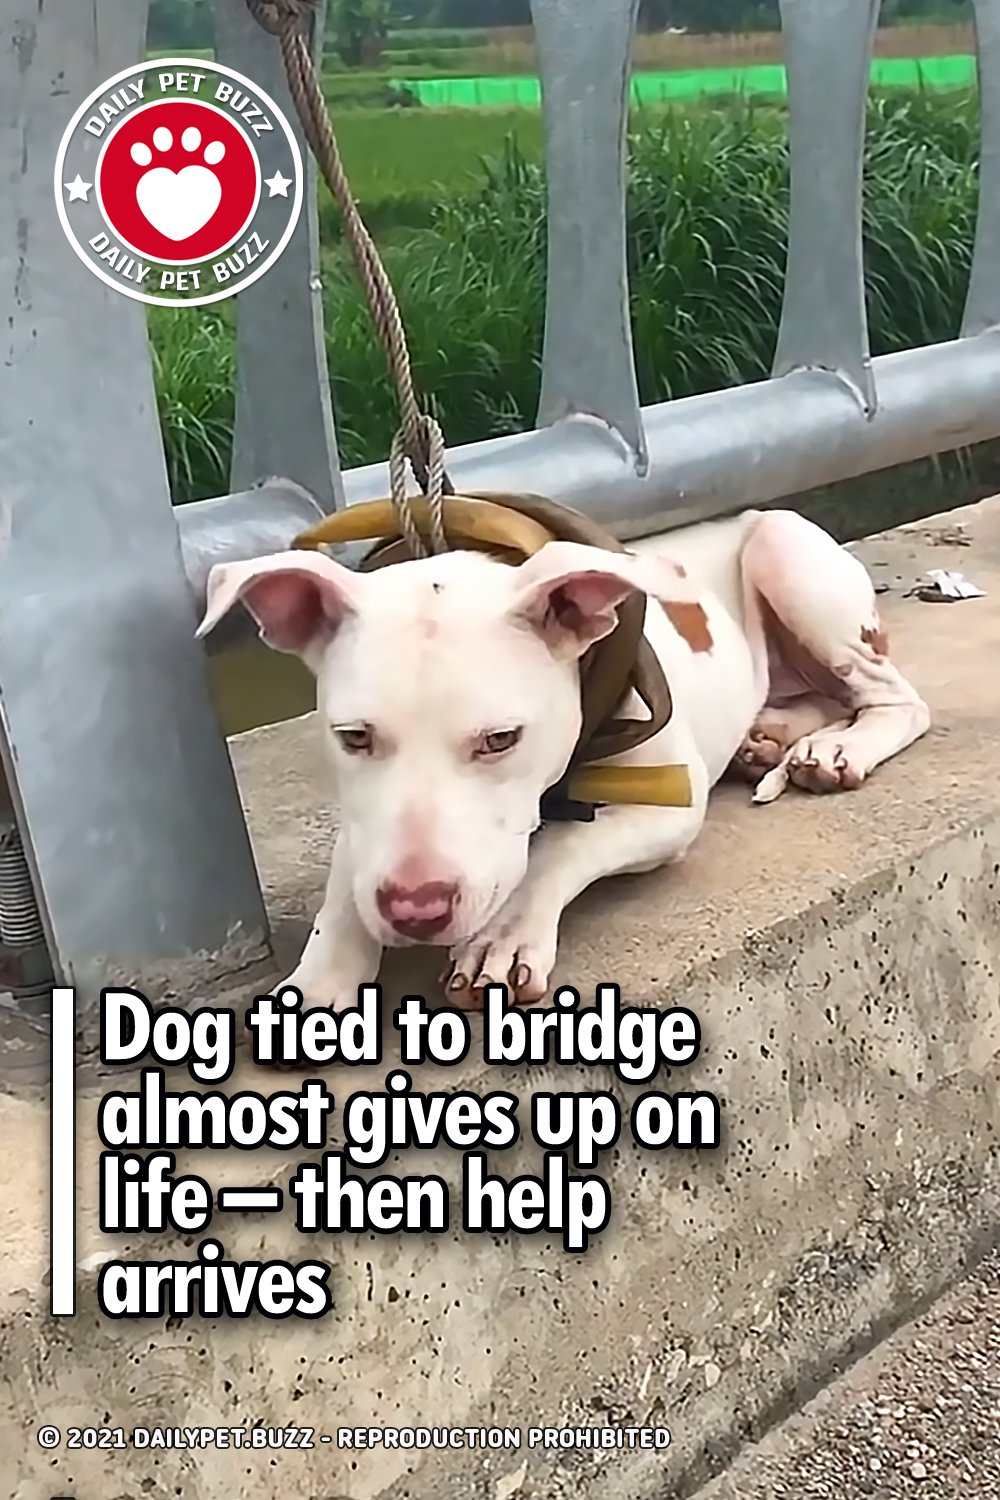 Dog tied to bridge almost gives up on life – then help arrives